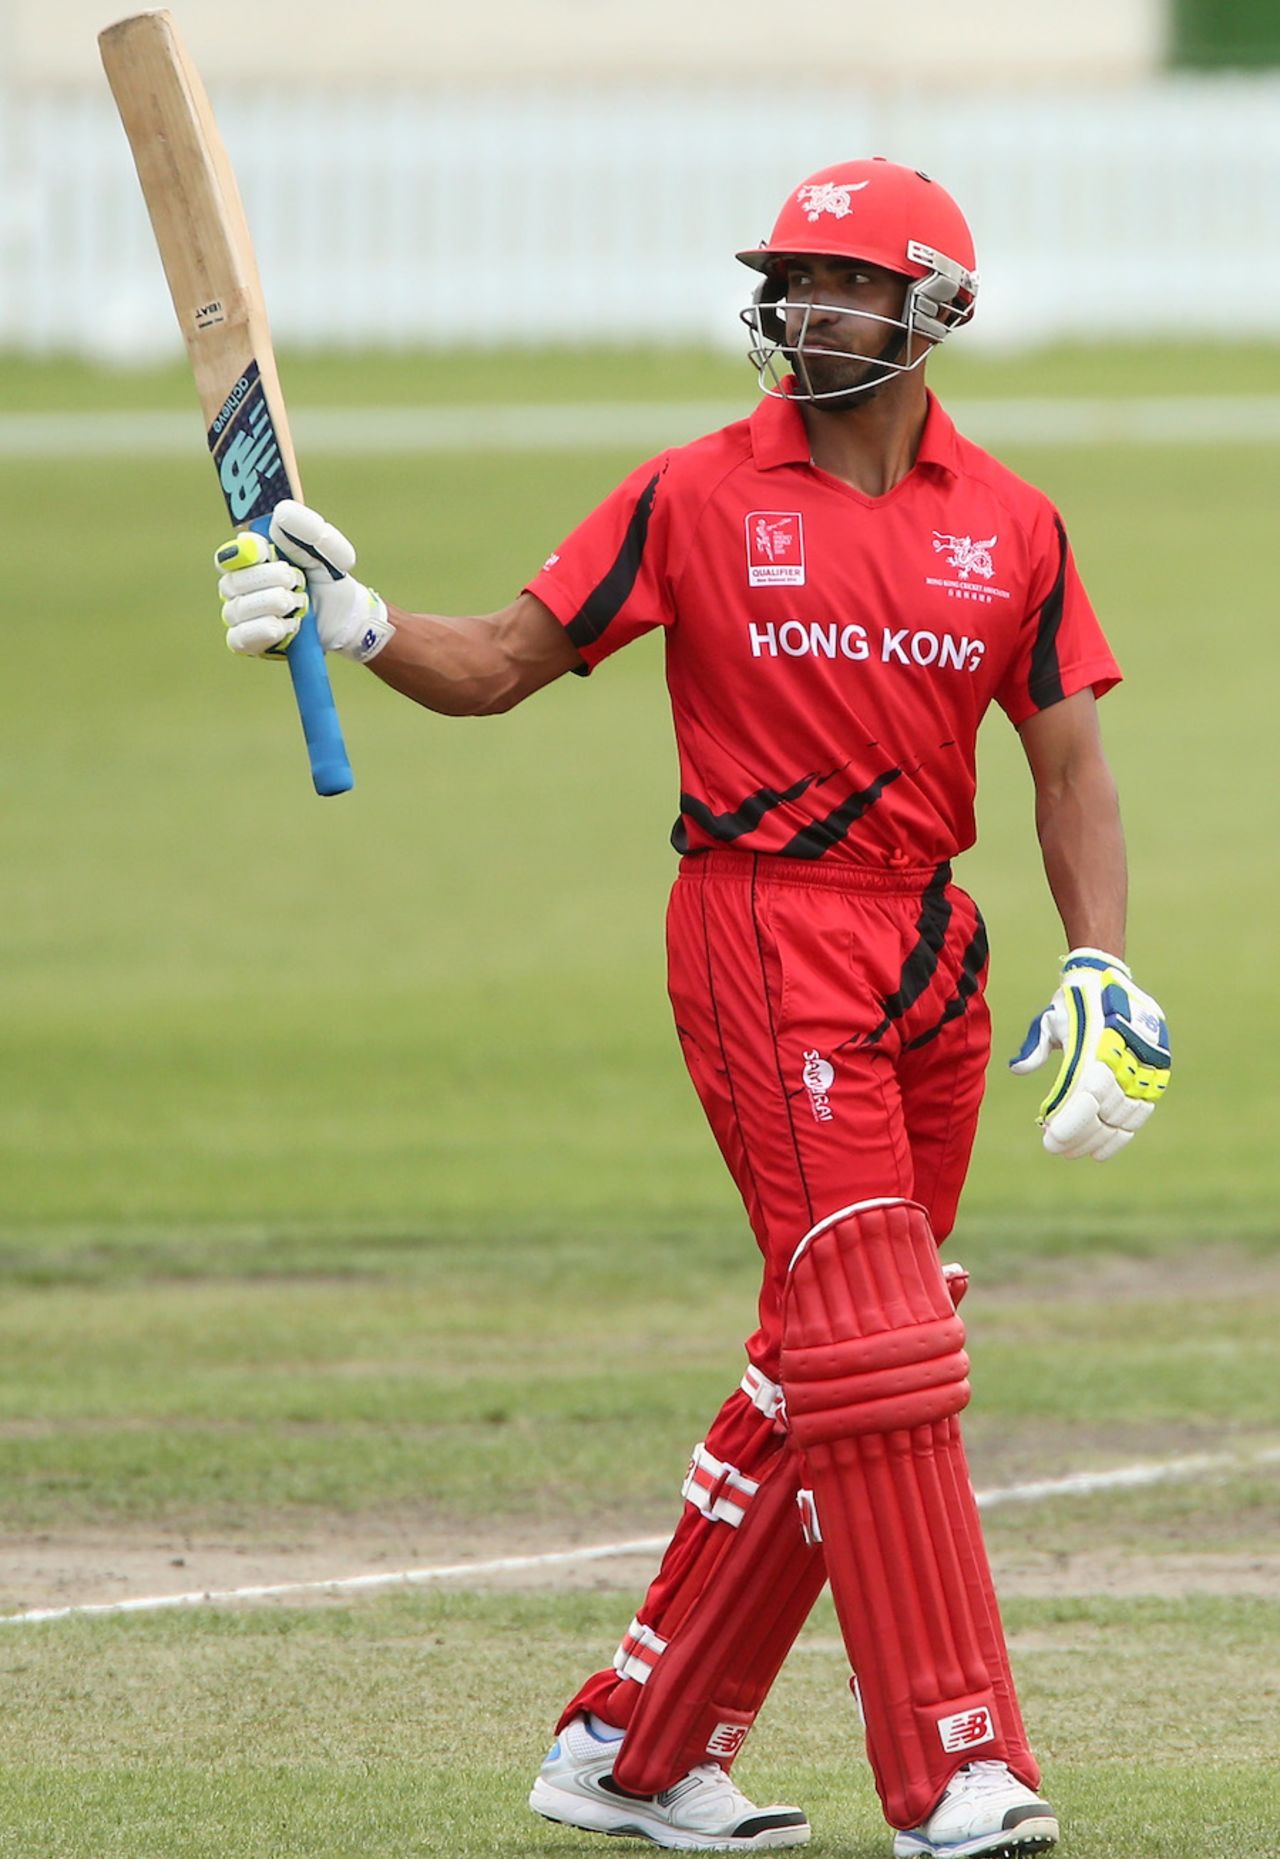 Irfan Ahmed raises his bat after reaching his fifty, Canada v Hong Kong, World Cup 2015 qualifiers, Rangiora, January 17, 2014